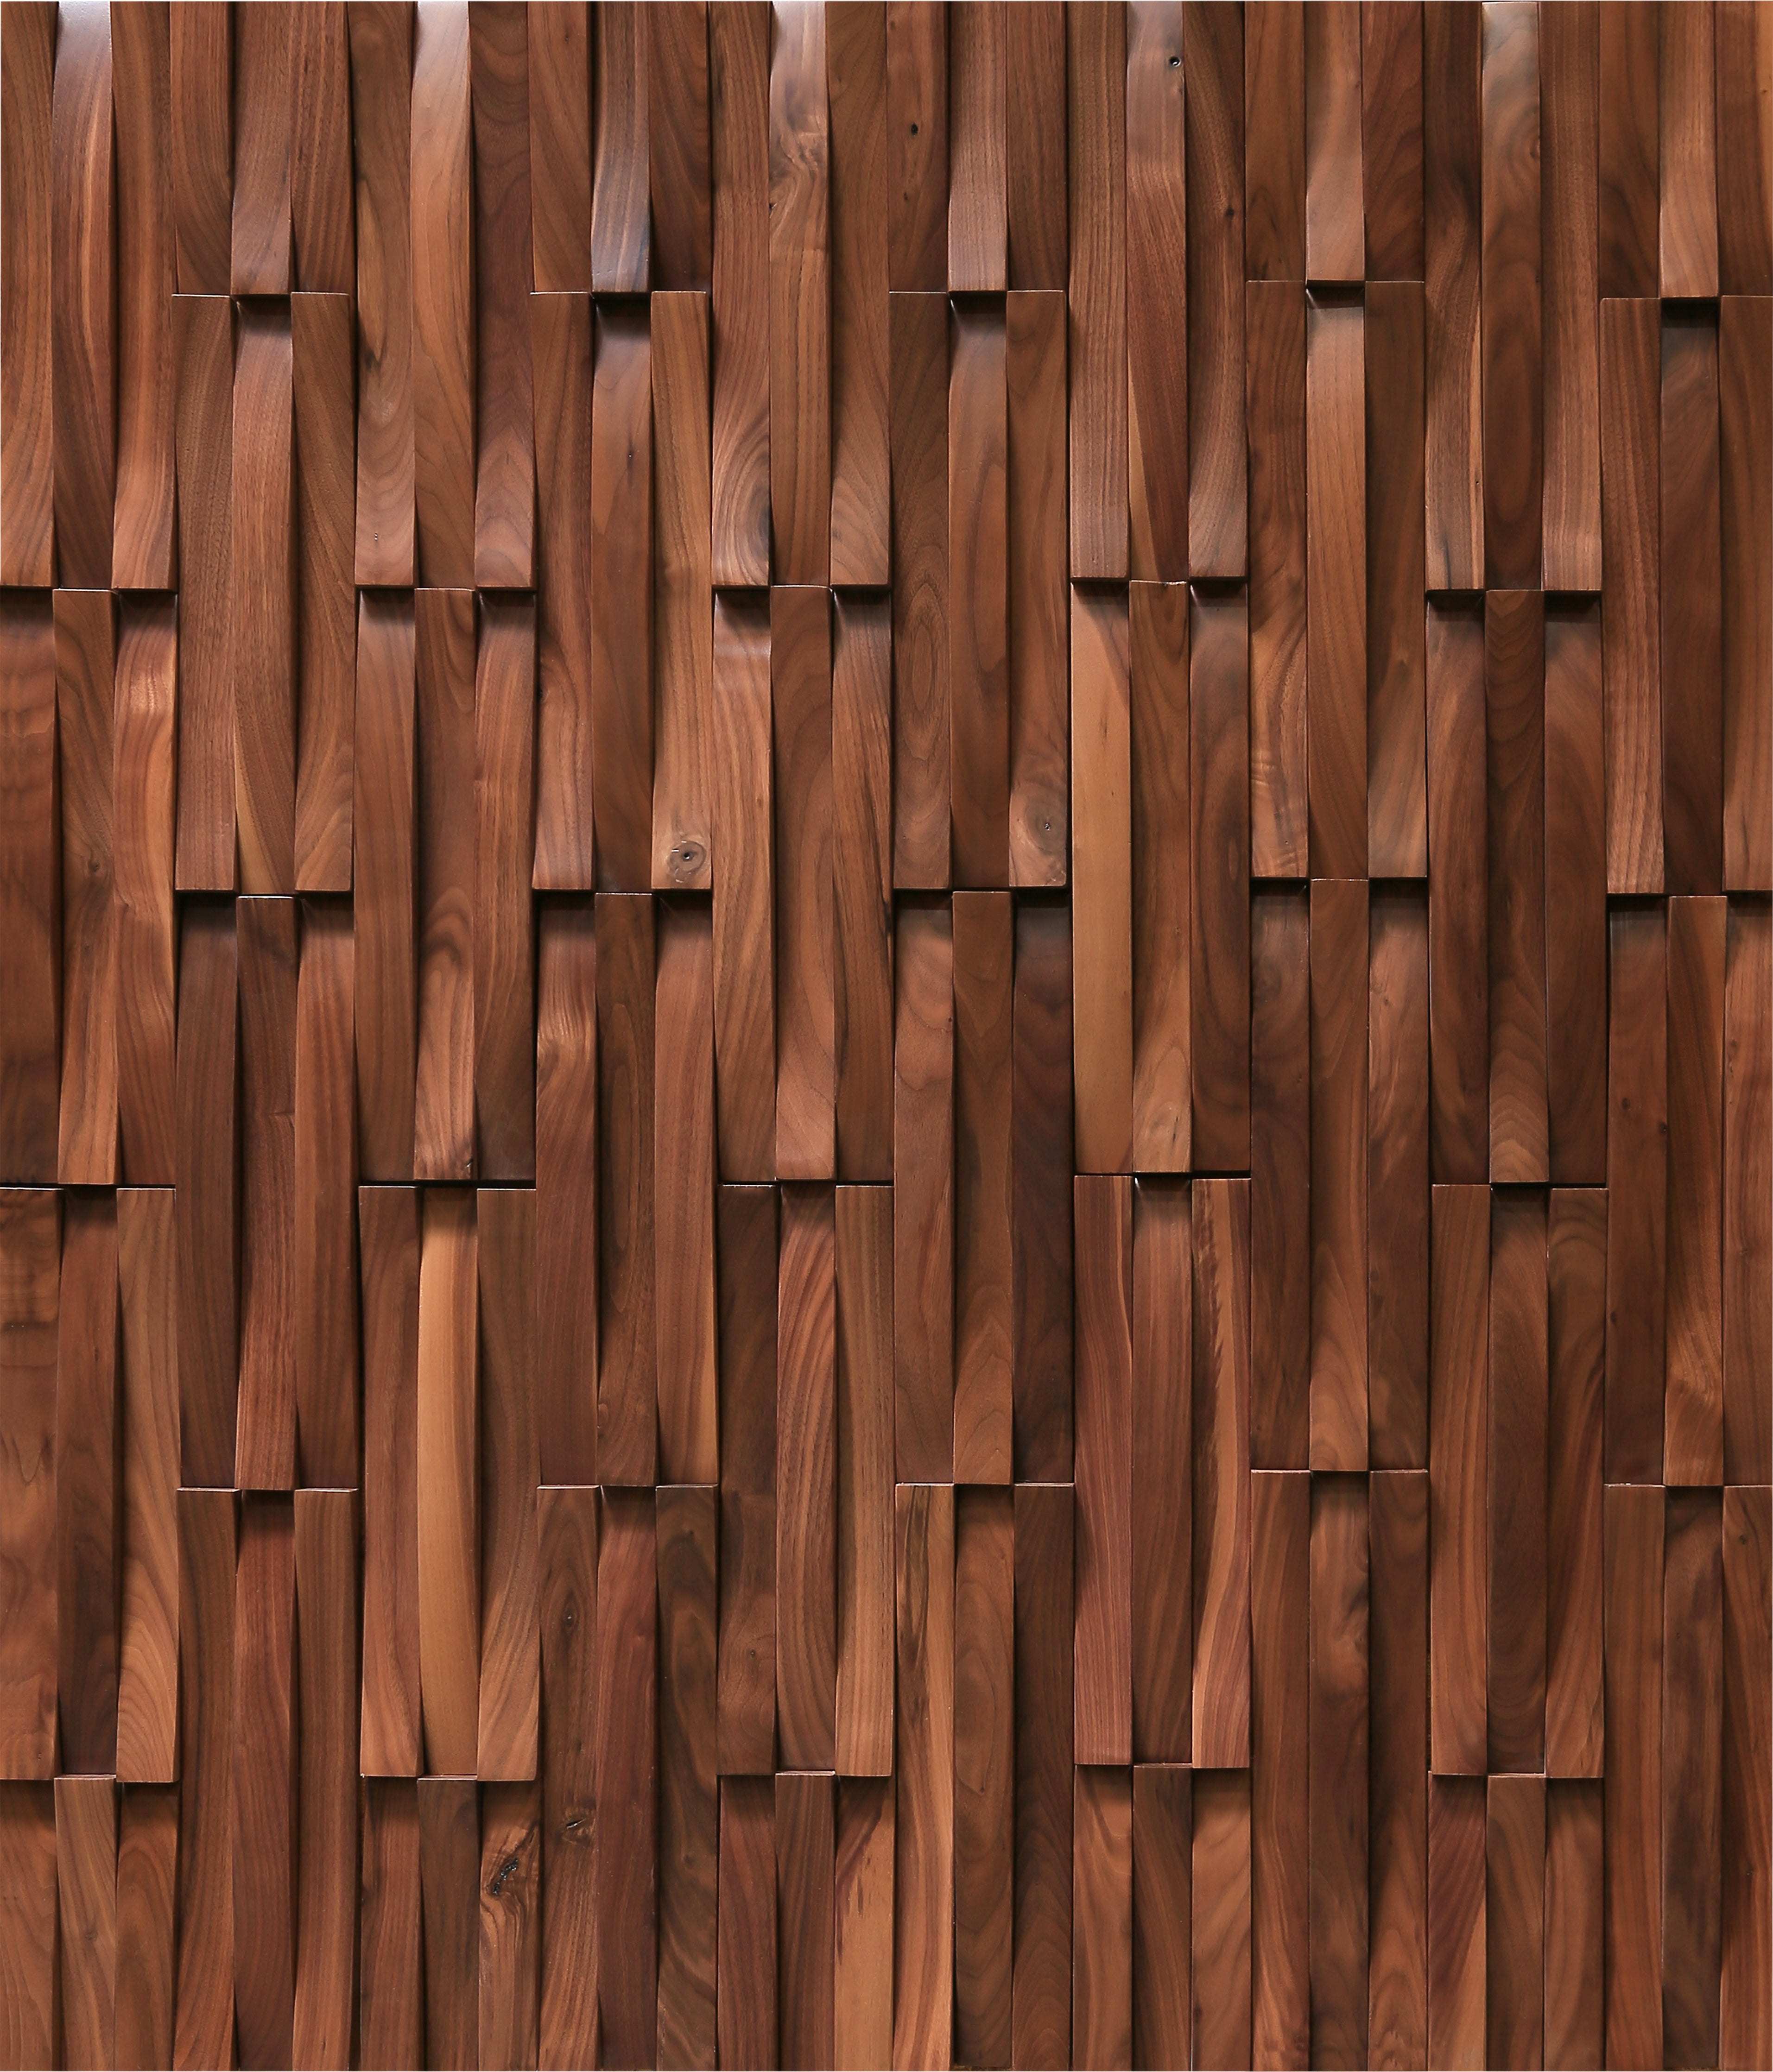 duchateau inceptiv krescent american walnut three dimensional wall natural wood panel conversion varnish for interior use distributed by surface group international